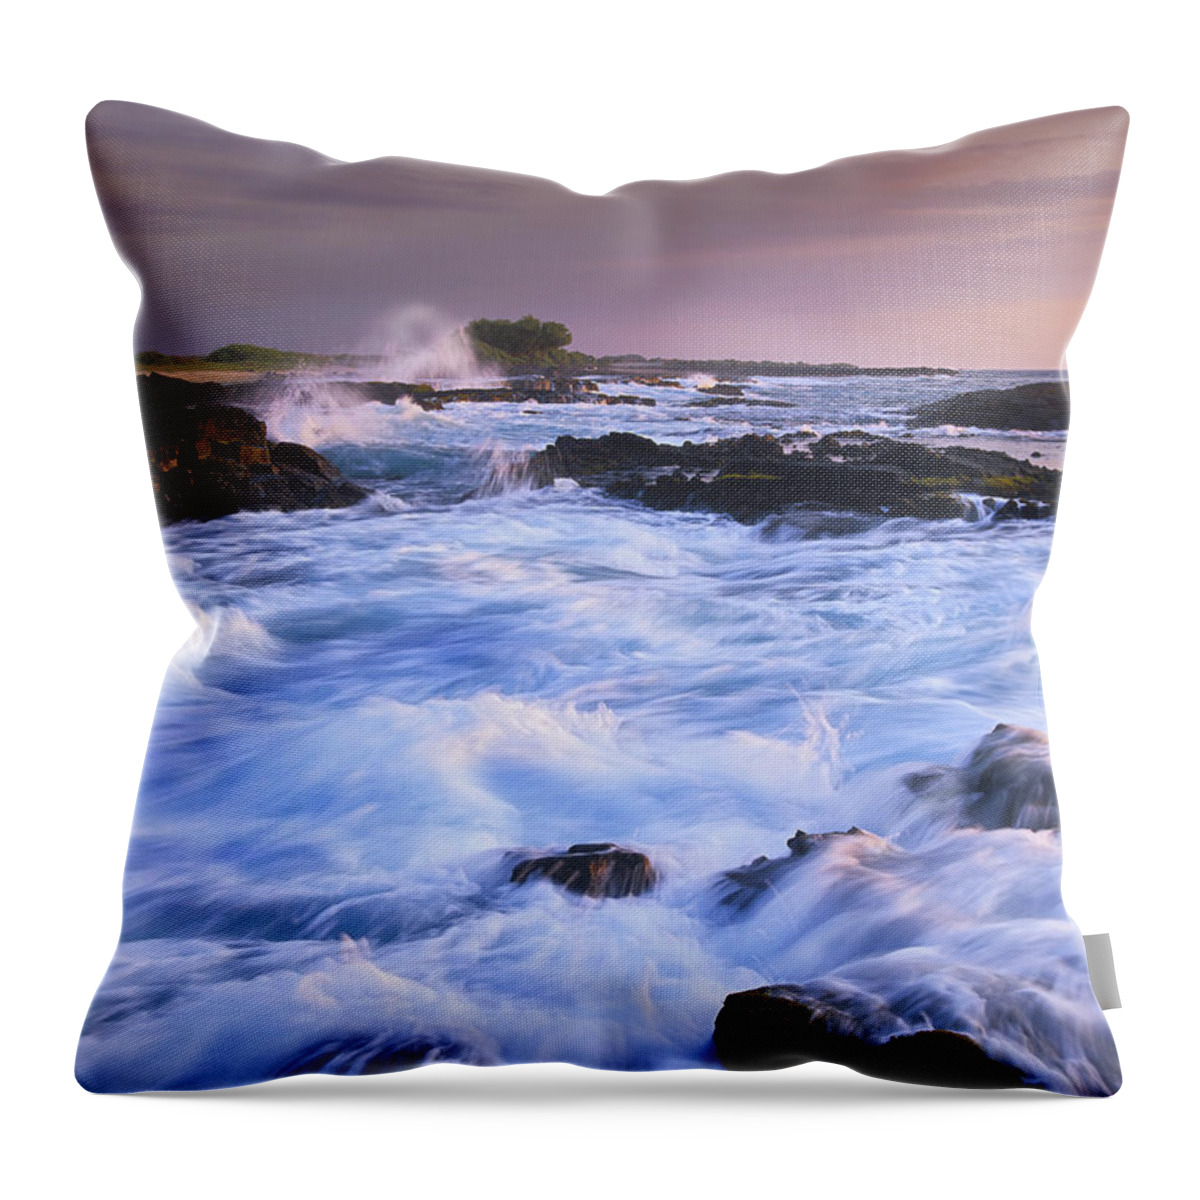 Feb0514 Throw Pillow featuring the photograph Waves And Surf At Wawaloli Beach Hawaii by Tim Fitzharris